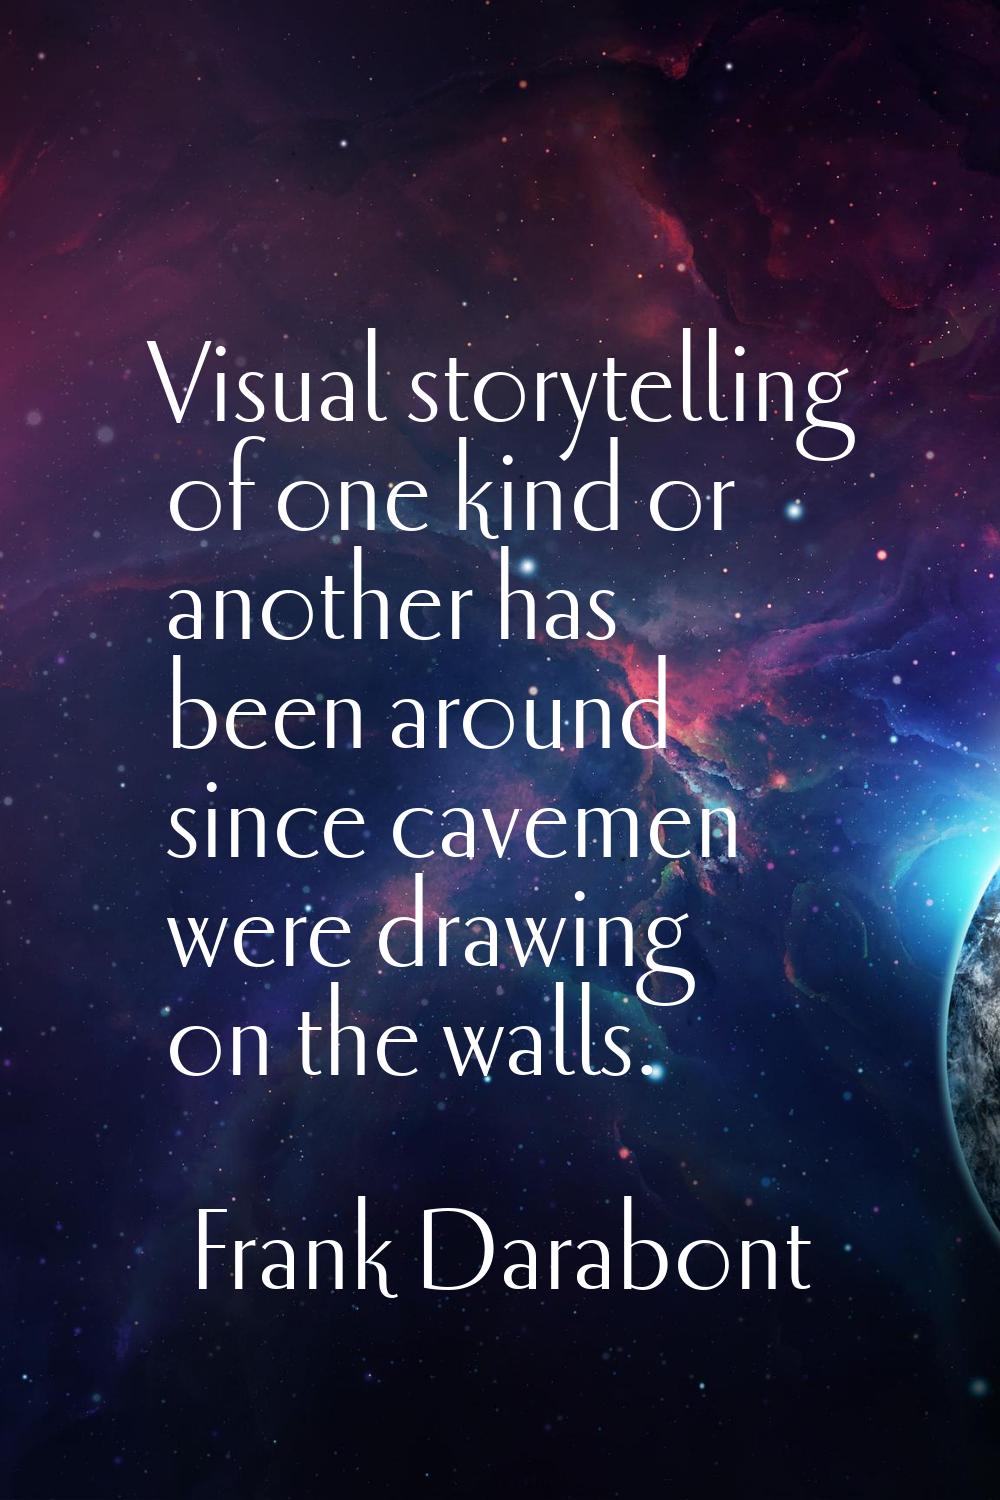 Visual storytelling of one kind or another has been around since cavemen were drawing on the walls.